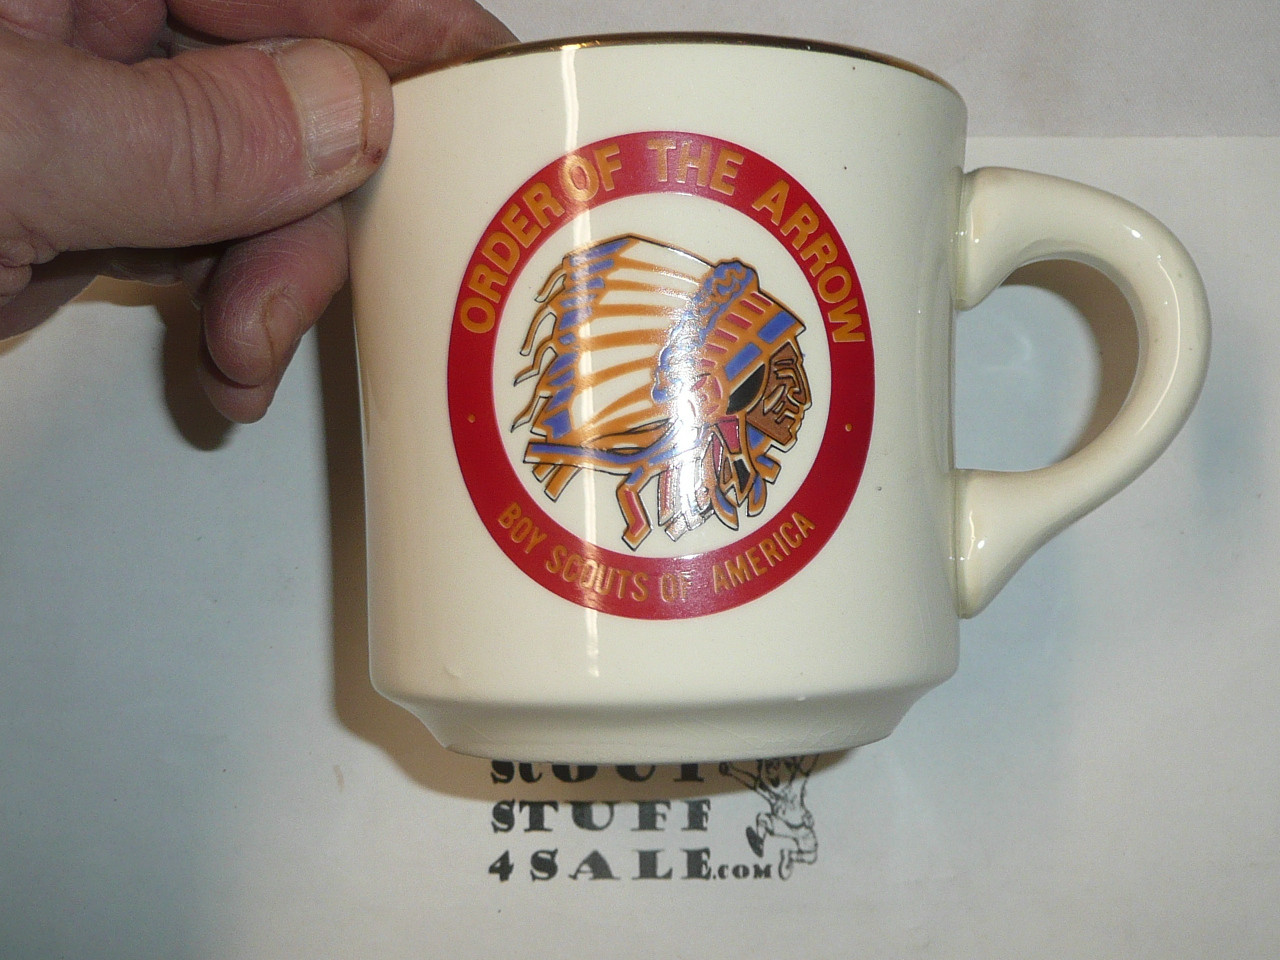 Order of the Arrow 1960's Indian Head Logo Mug, National Issue, larger logo